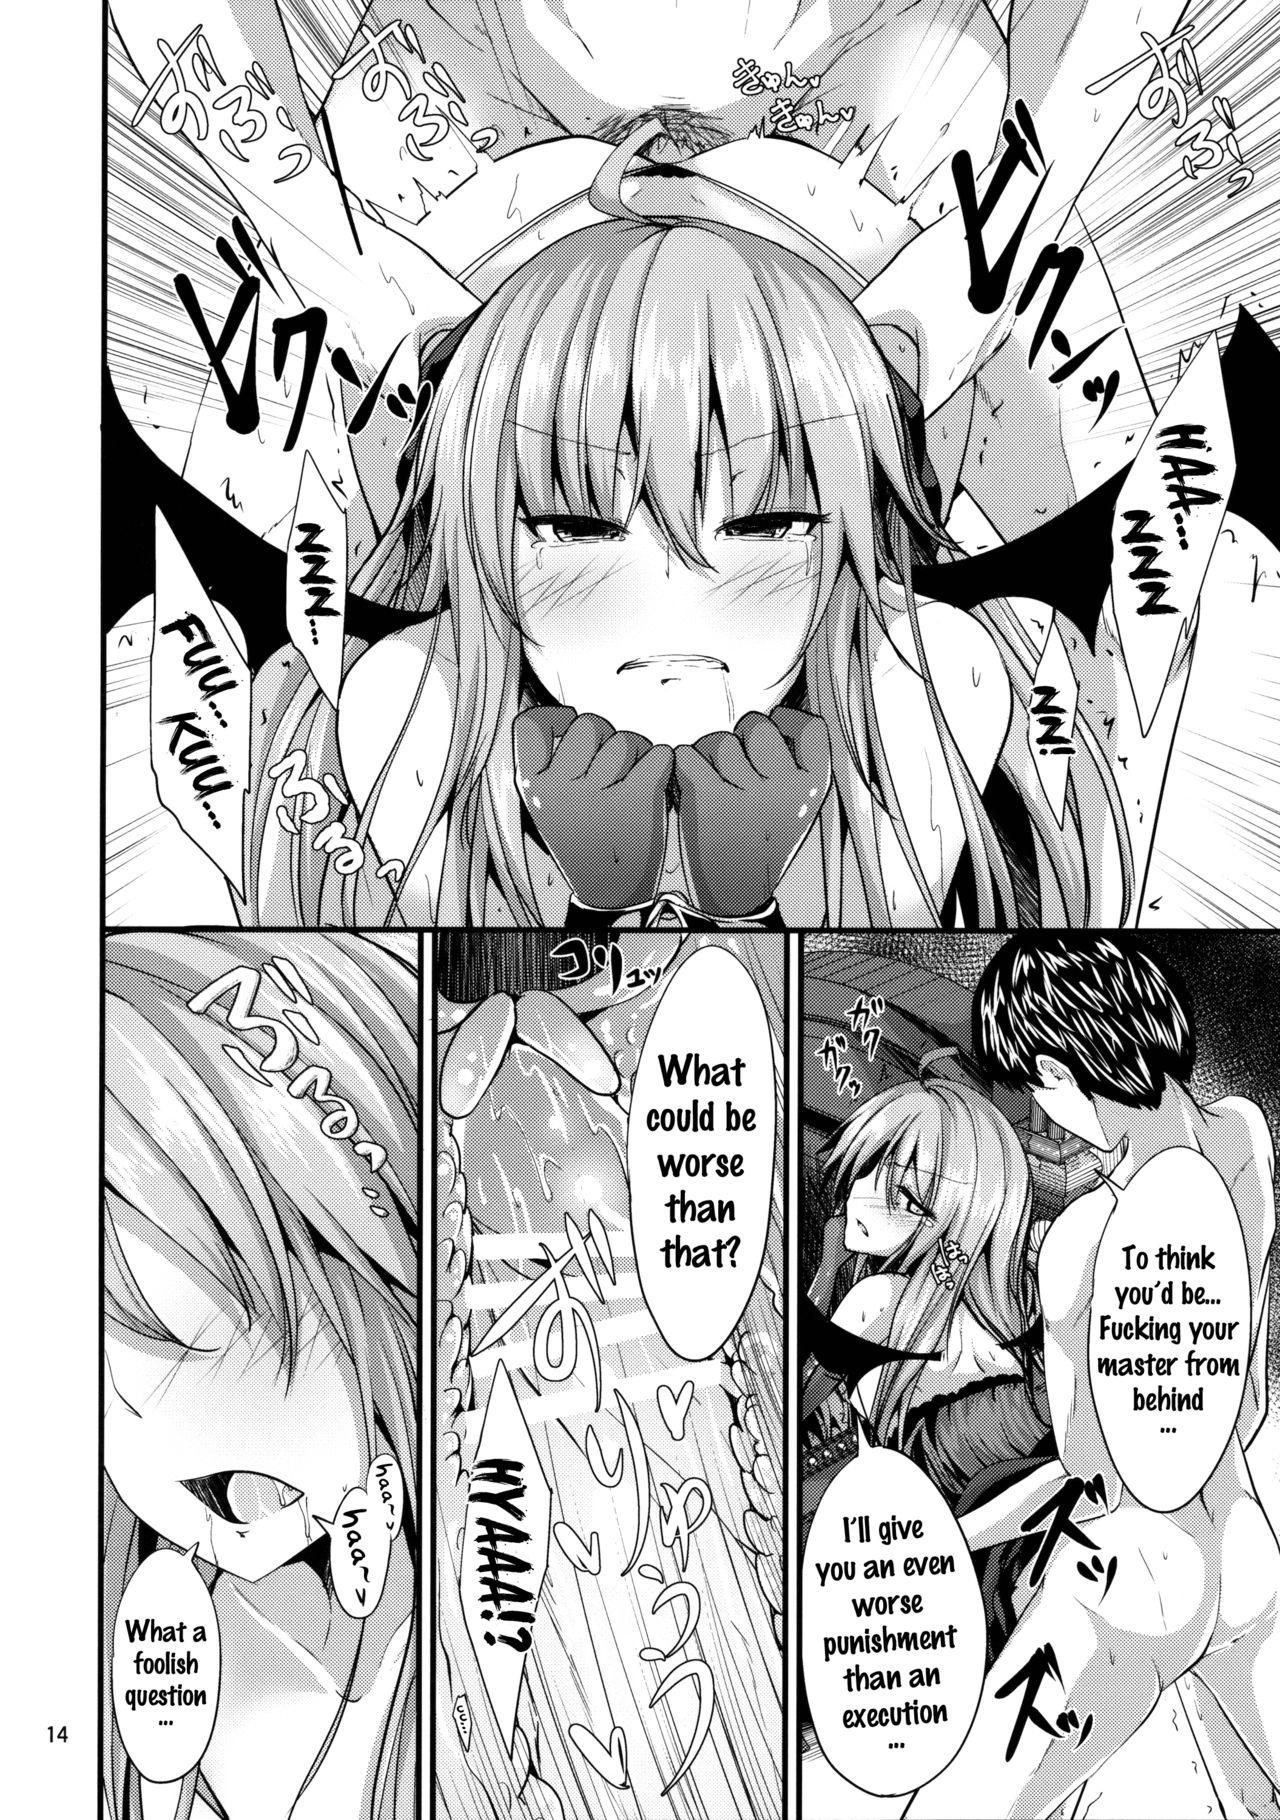 Boys Remi no Motto Otona ni Narumon! | Remi's Becoming More of An Adult! - Touhou project Gay Party - Page 13